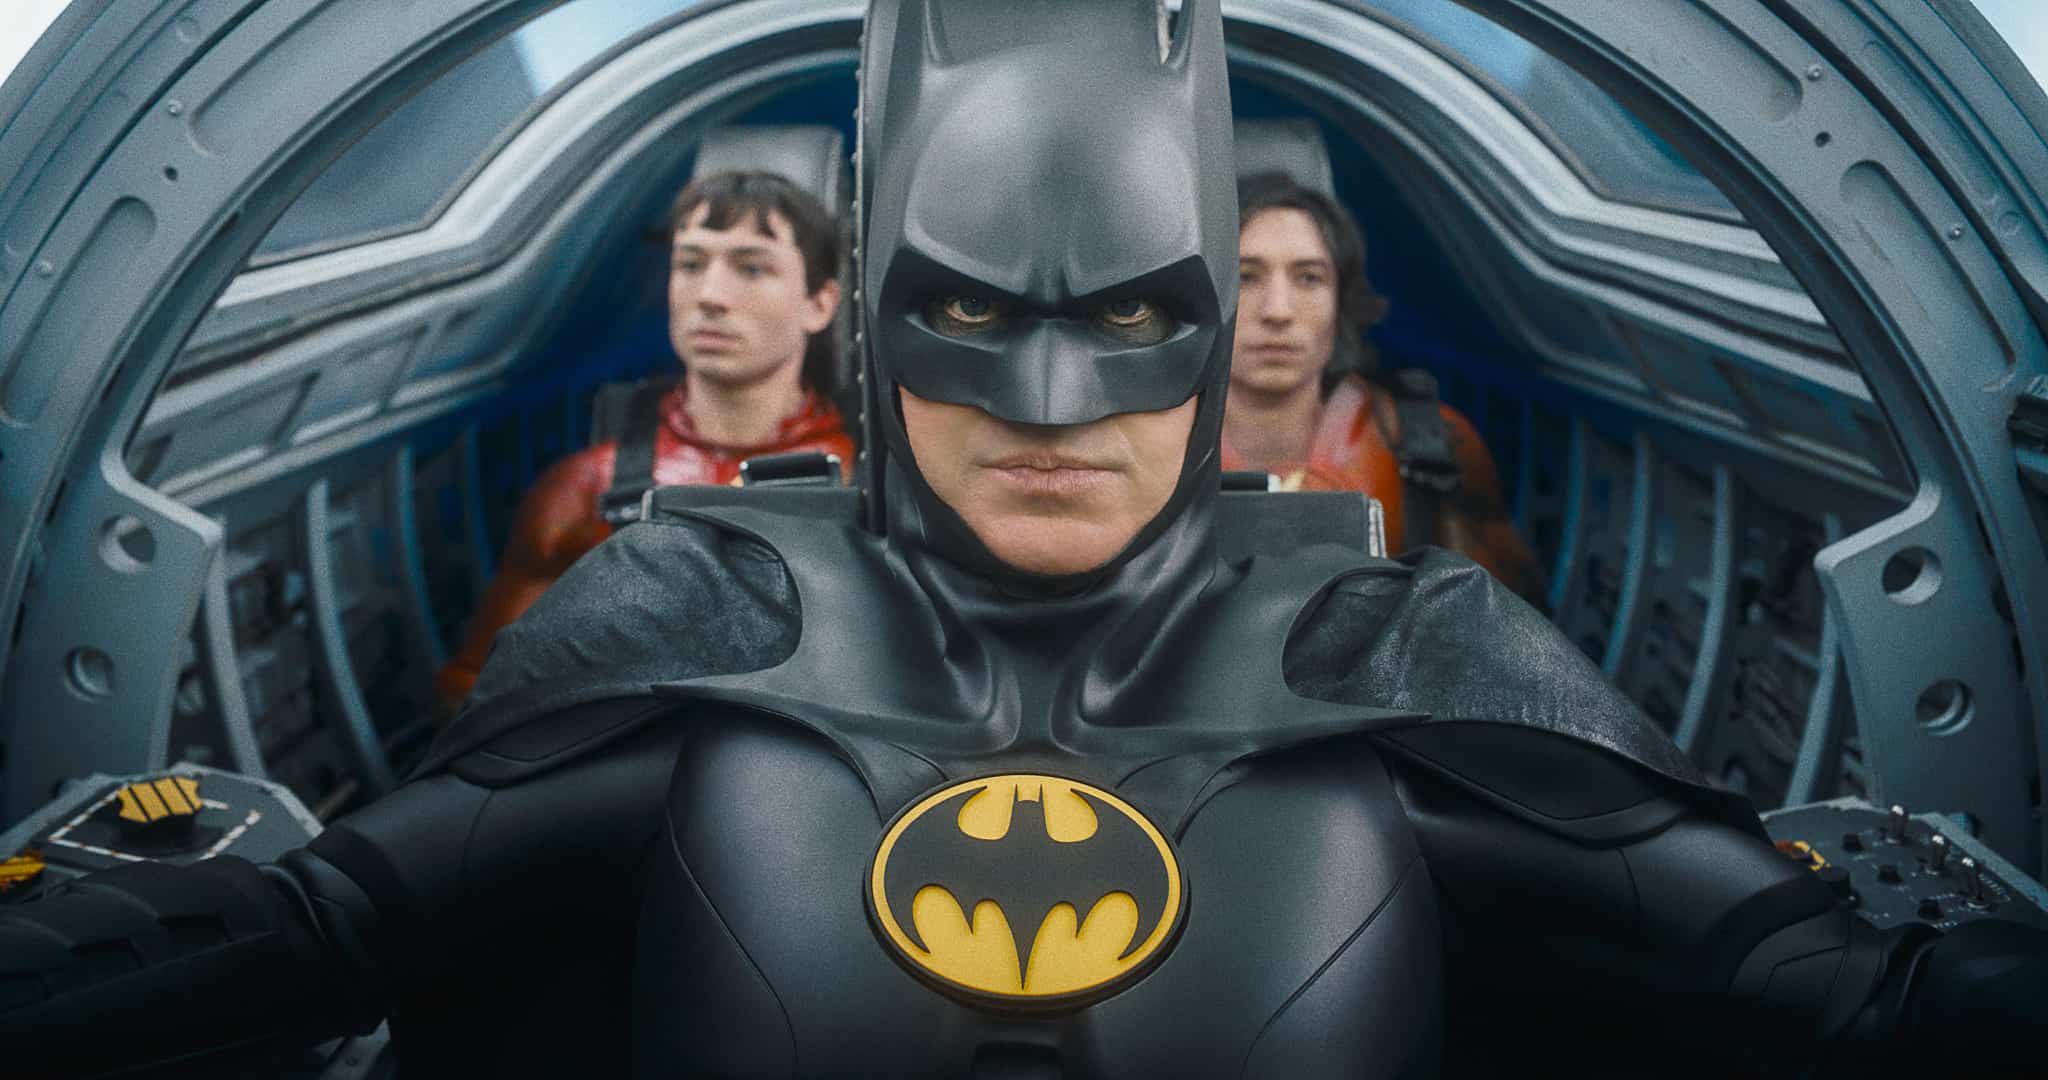 Two Ezra Millers and Michael Keaton in this image from DC Studios